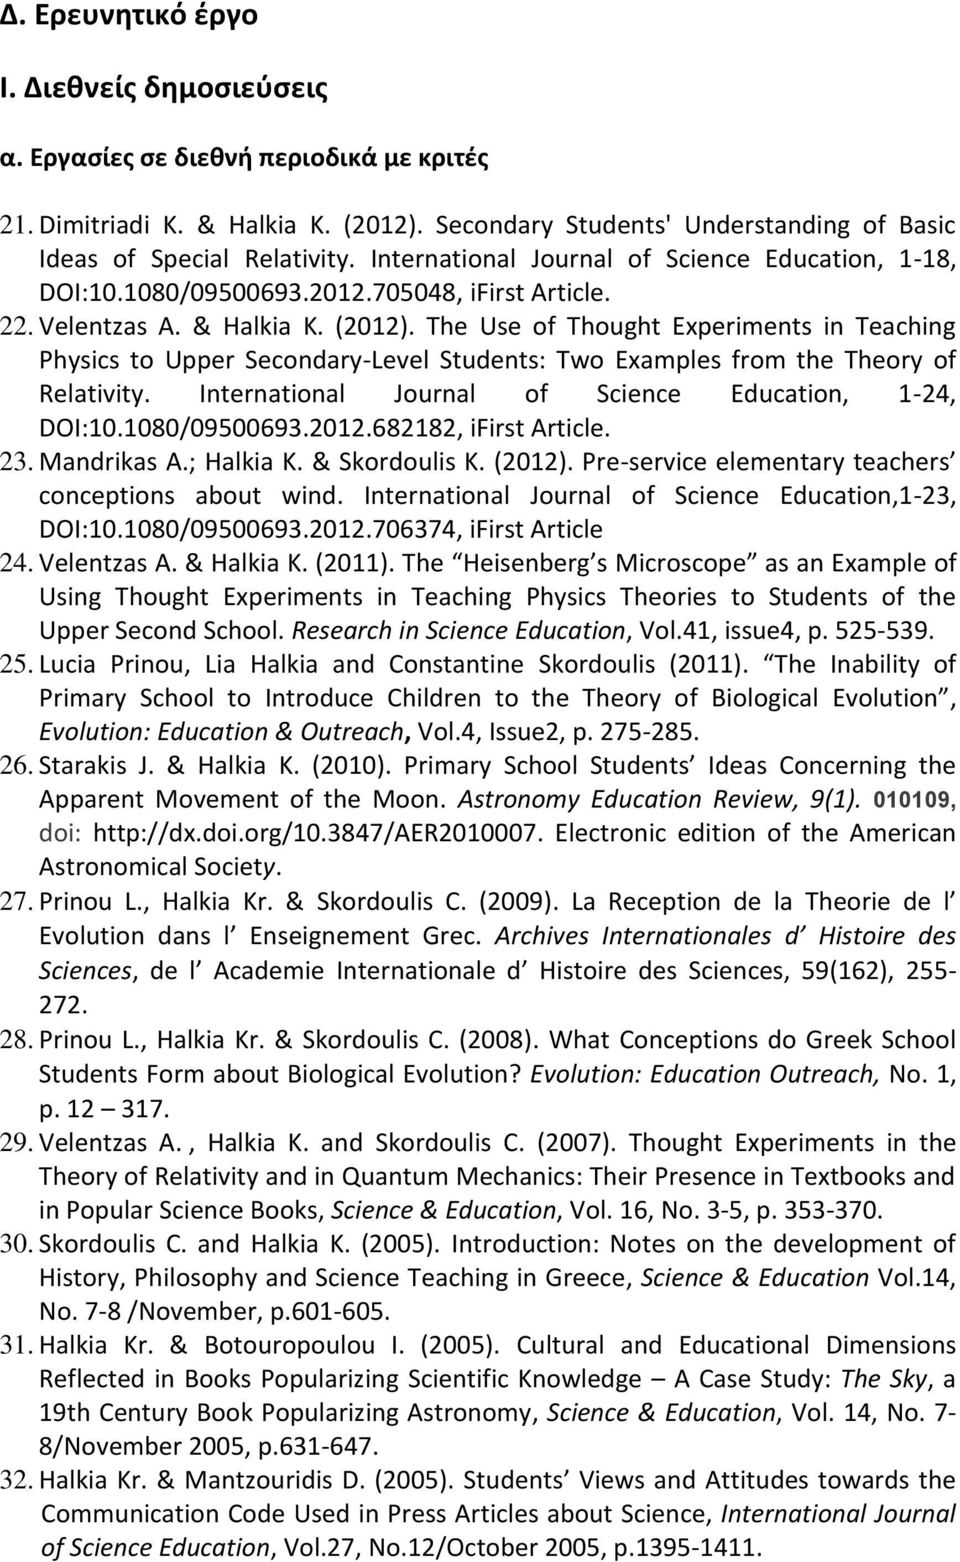 The Use of Thought Experiments in Teaching Physics to Upper Secondary-Level Students: Two Examples from the Theory of Relativity. International Journal of Science Education, 1-24, DOI:10.